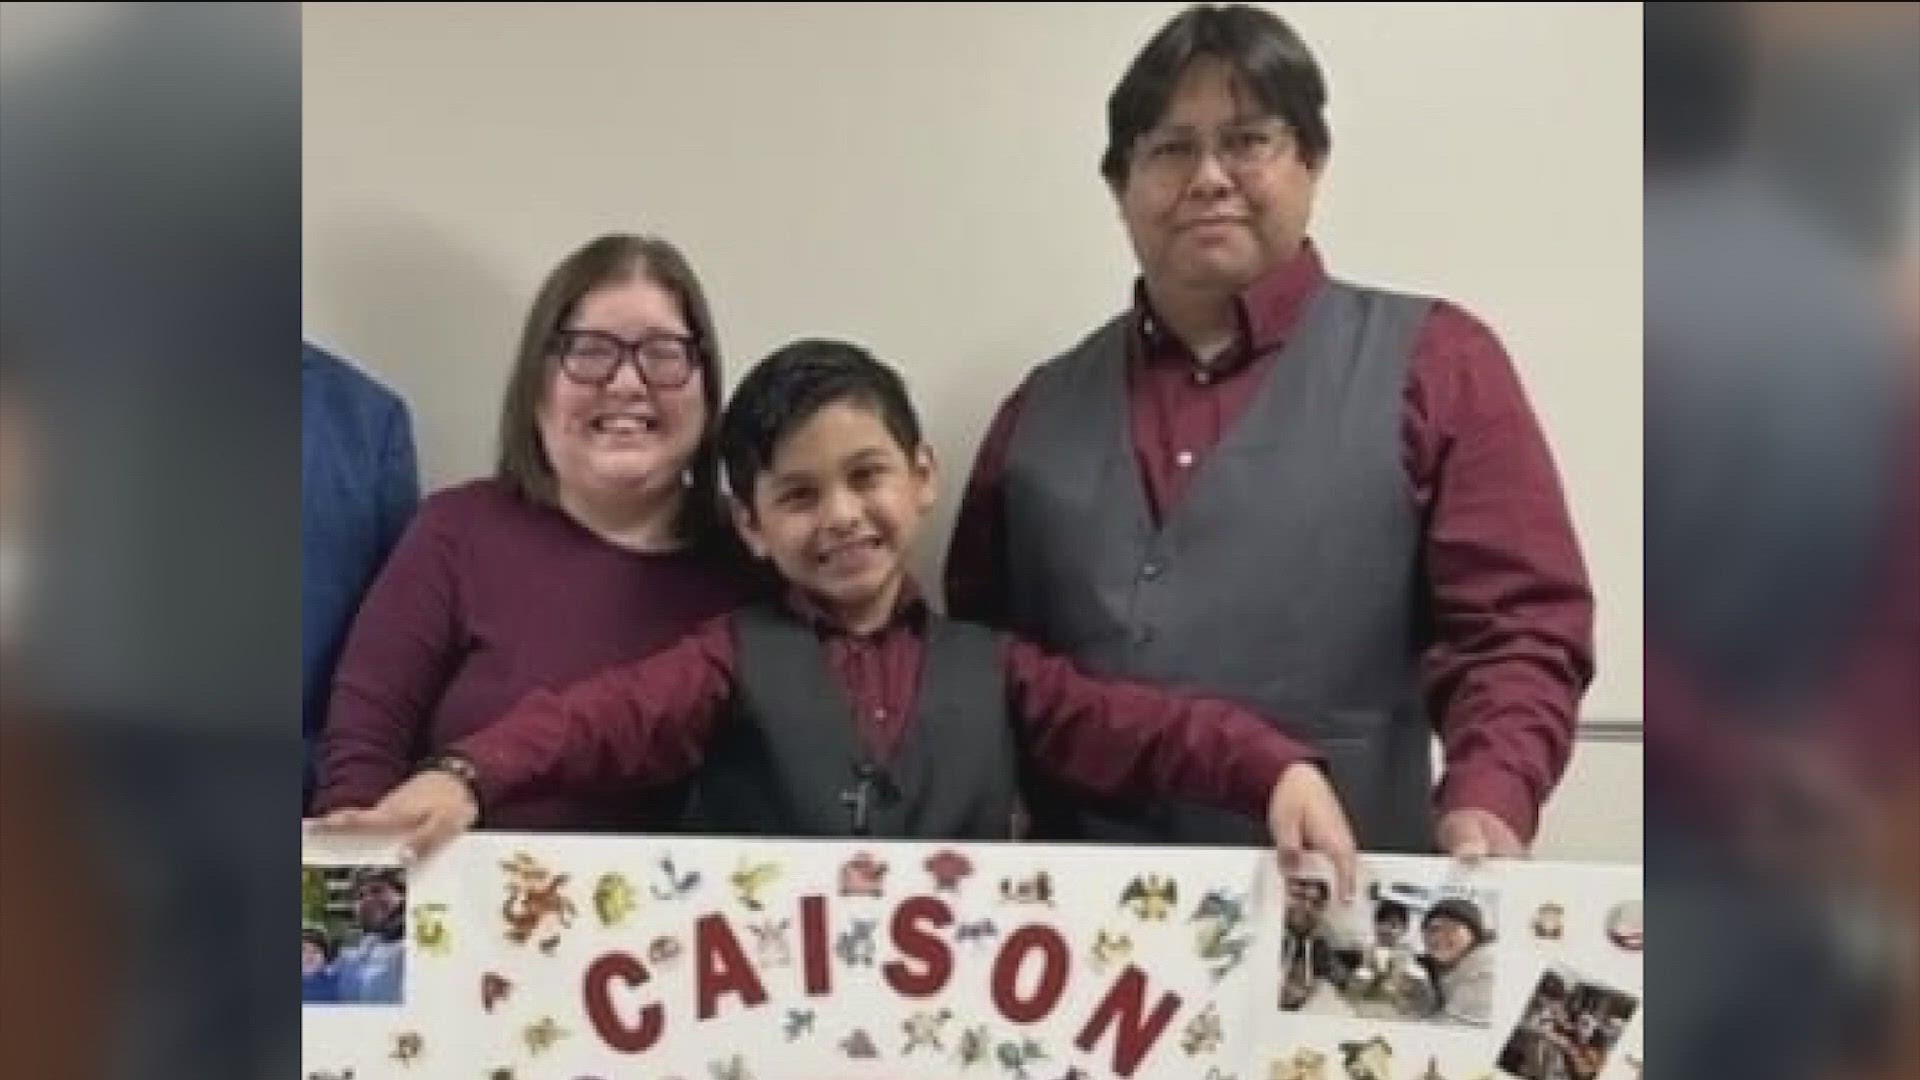 Caison's adoption was recently made official!